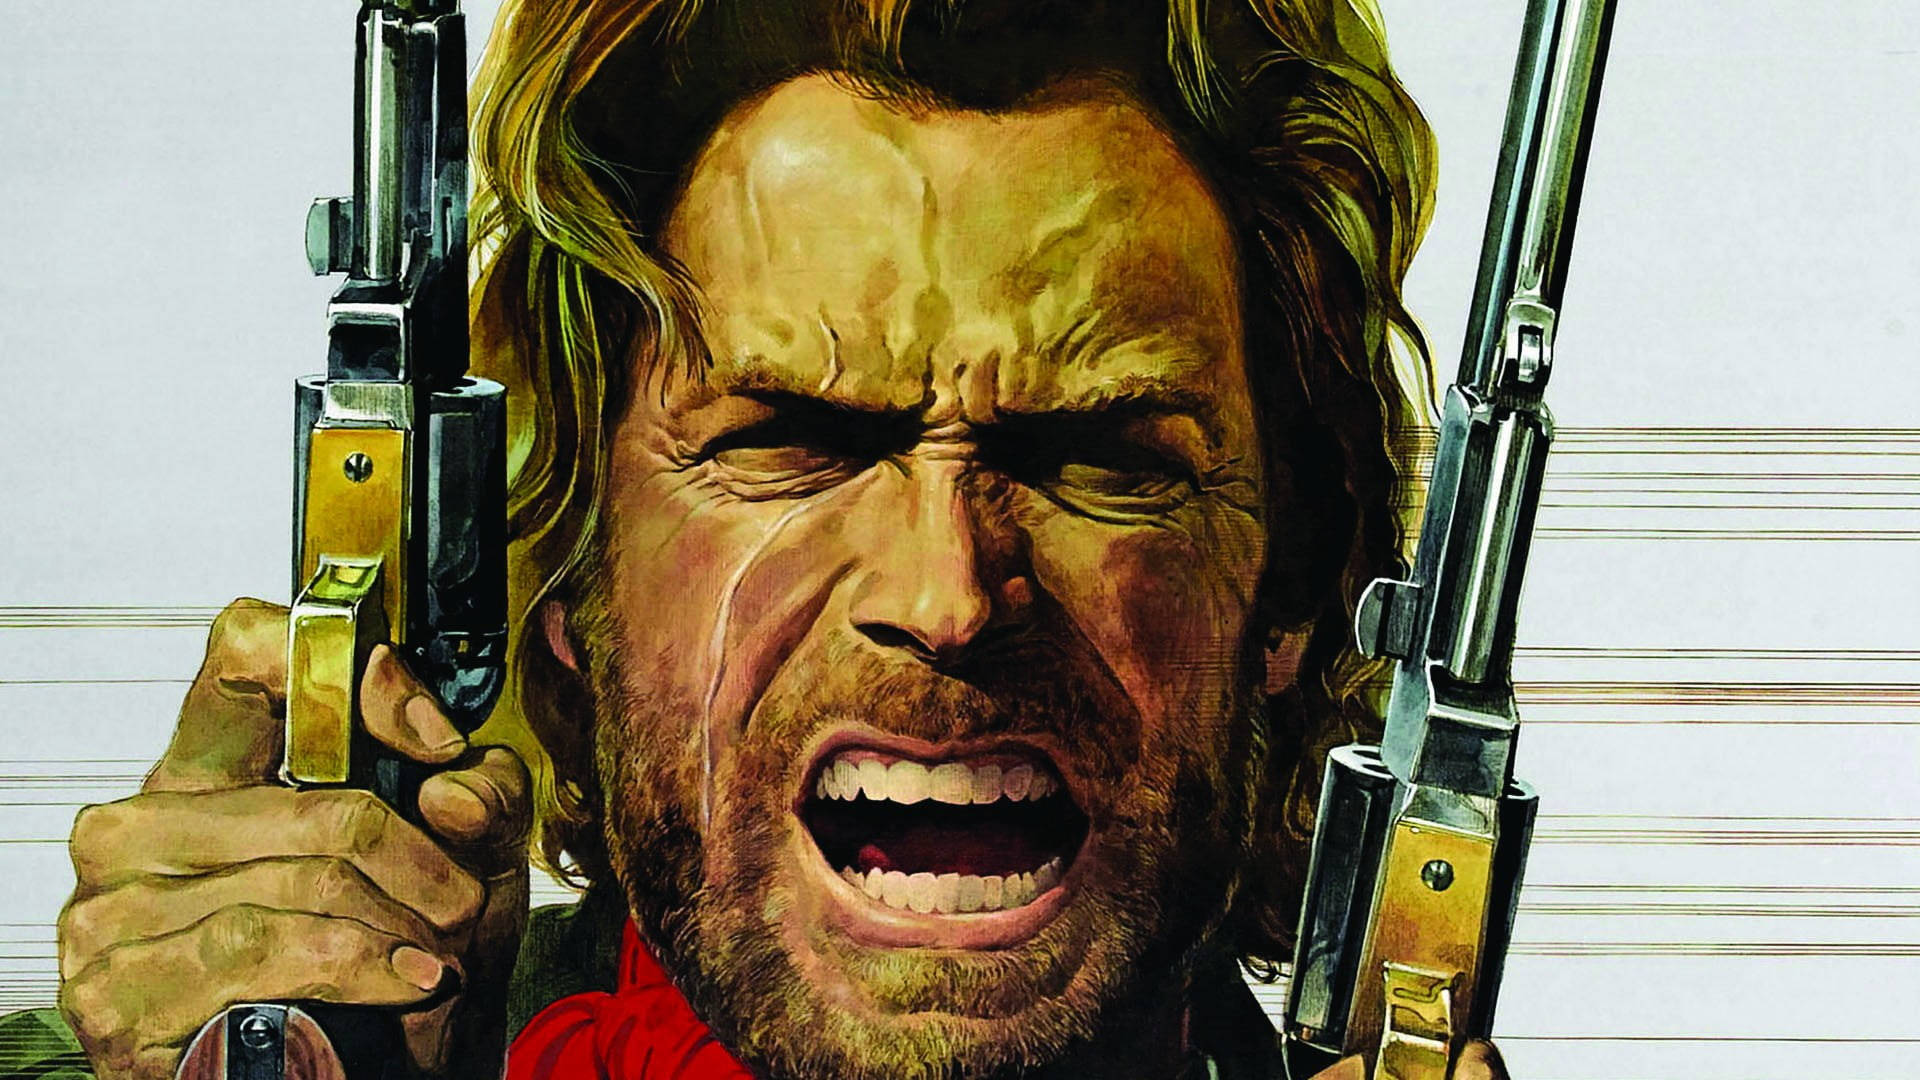 Clint Eastwood Outlaw Josey Wales Poster. Wallpaper